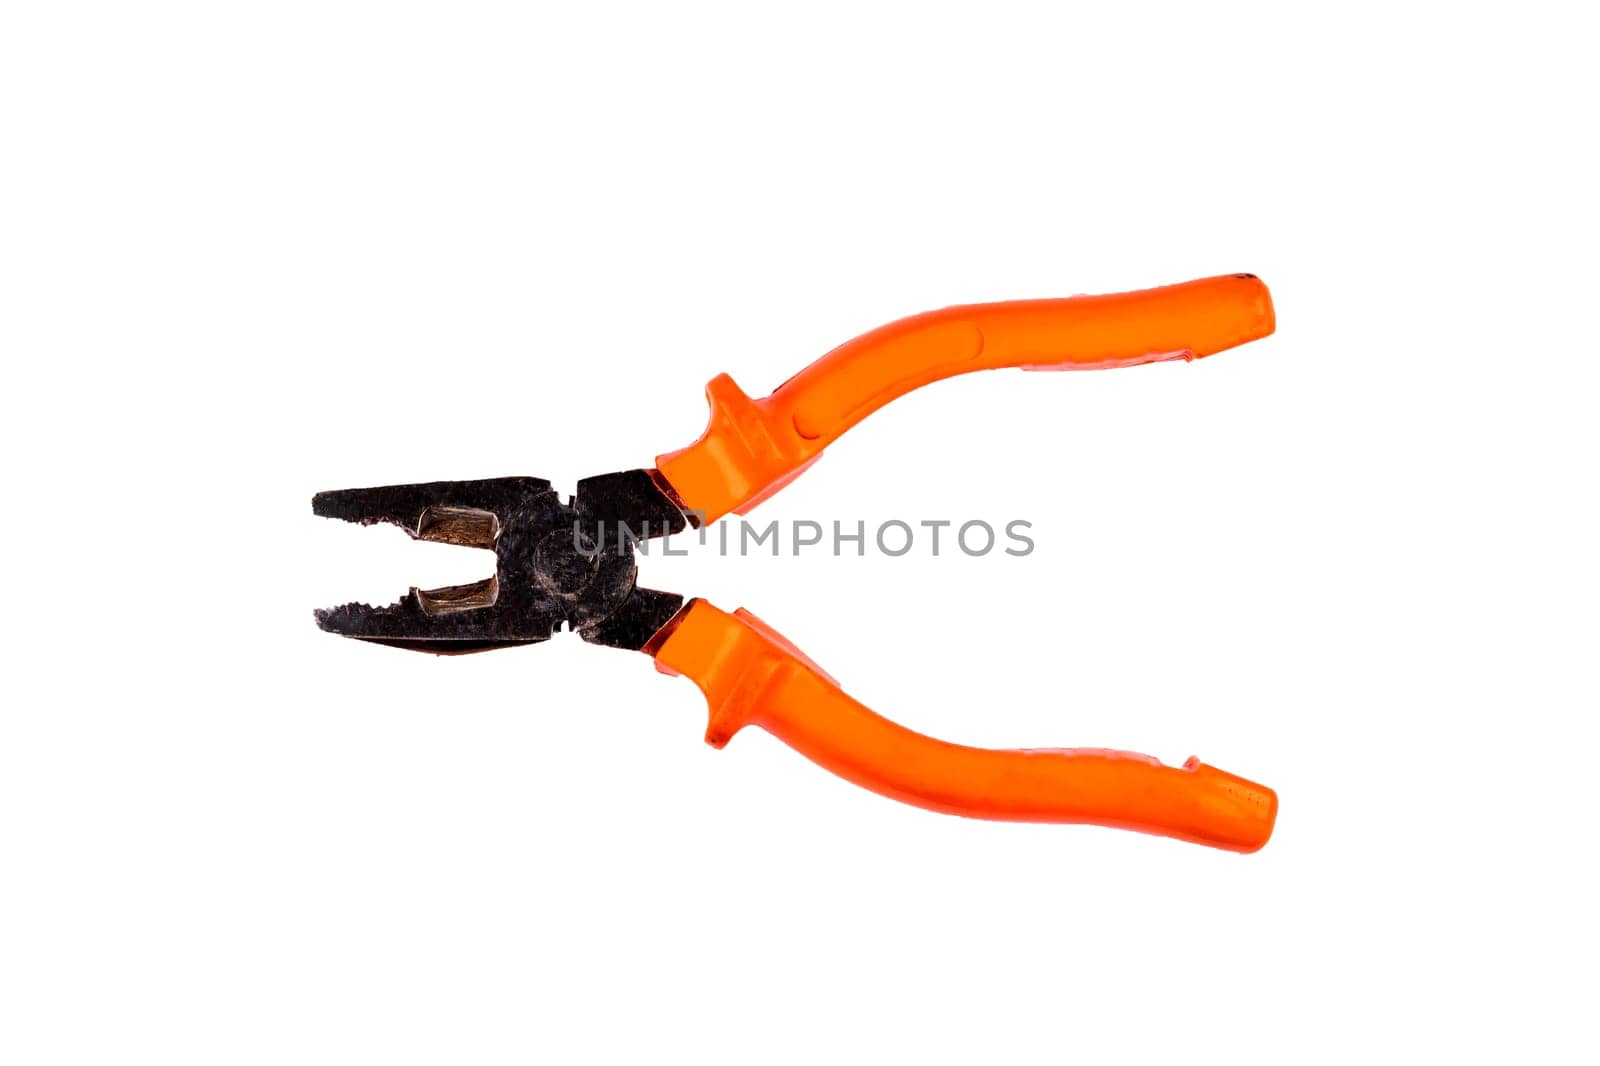 Used pliers with orange rubber handles, isolated on white background by EdVal